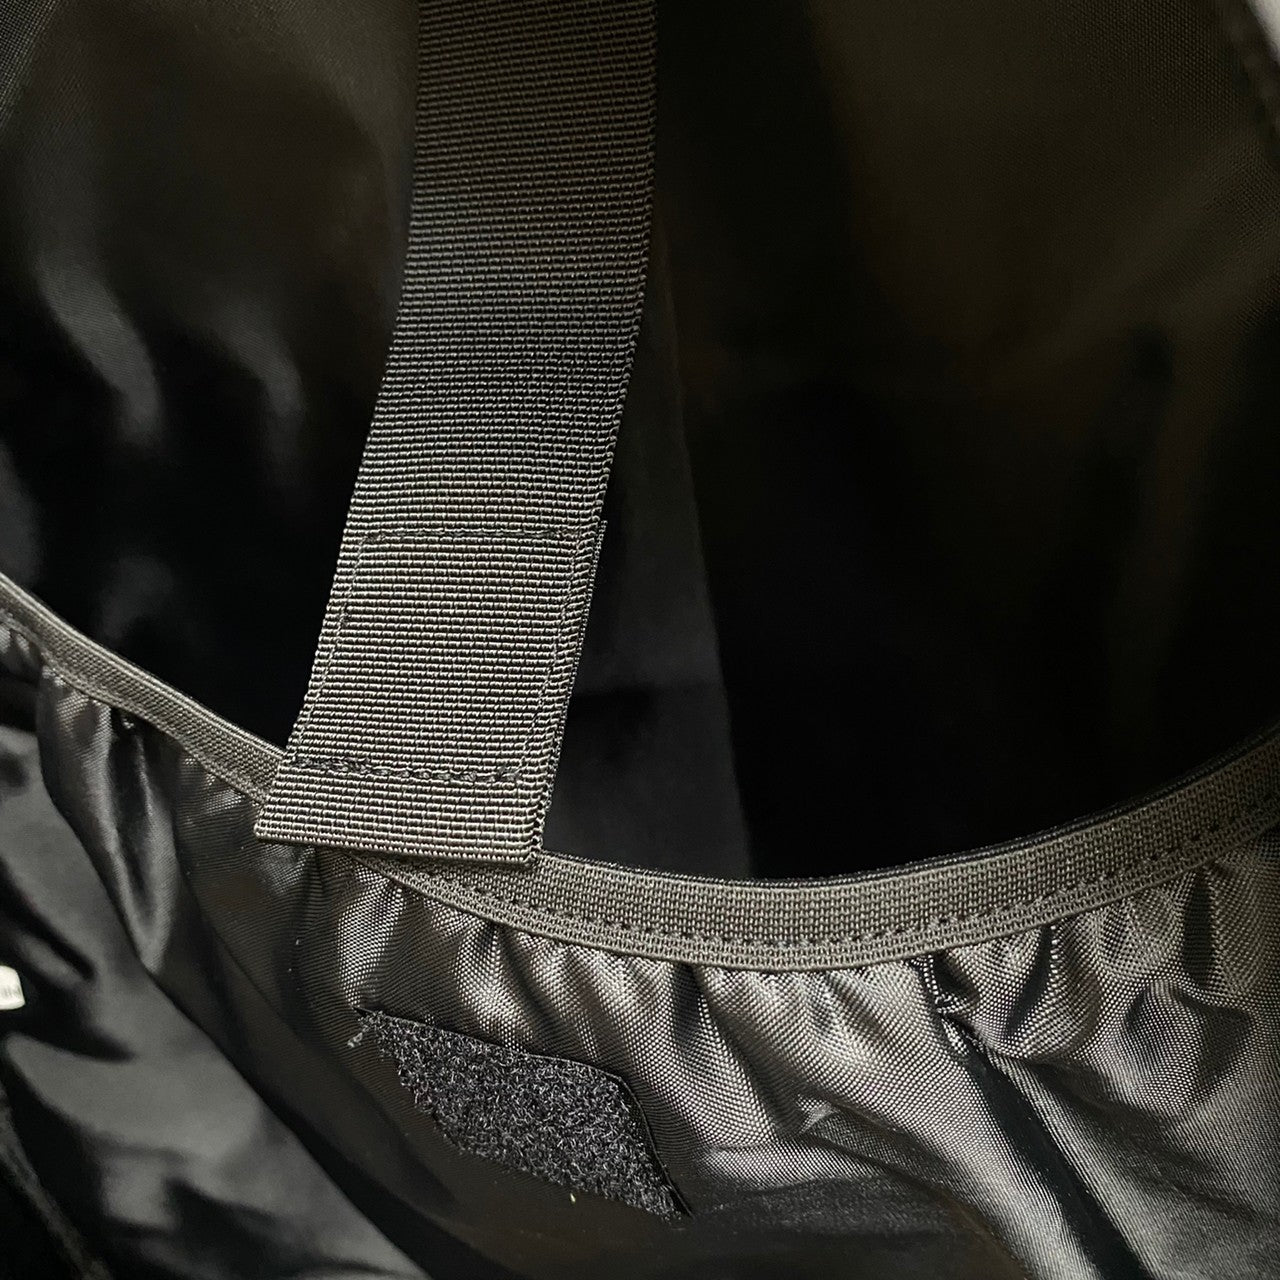 RIP STOP DOUBLE POCKET BACKPACK / PACKING